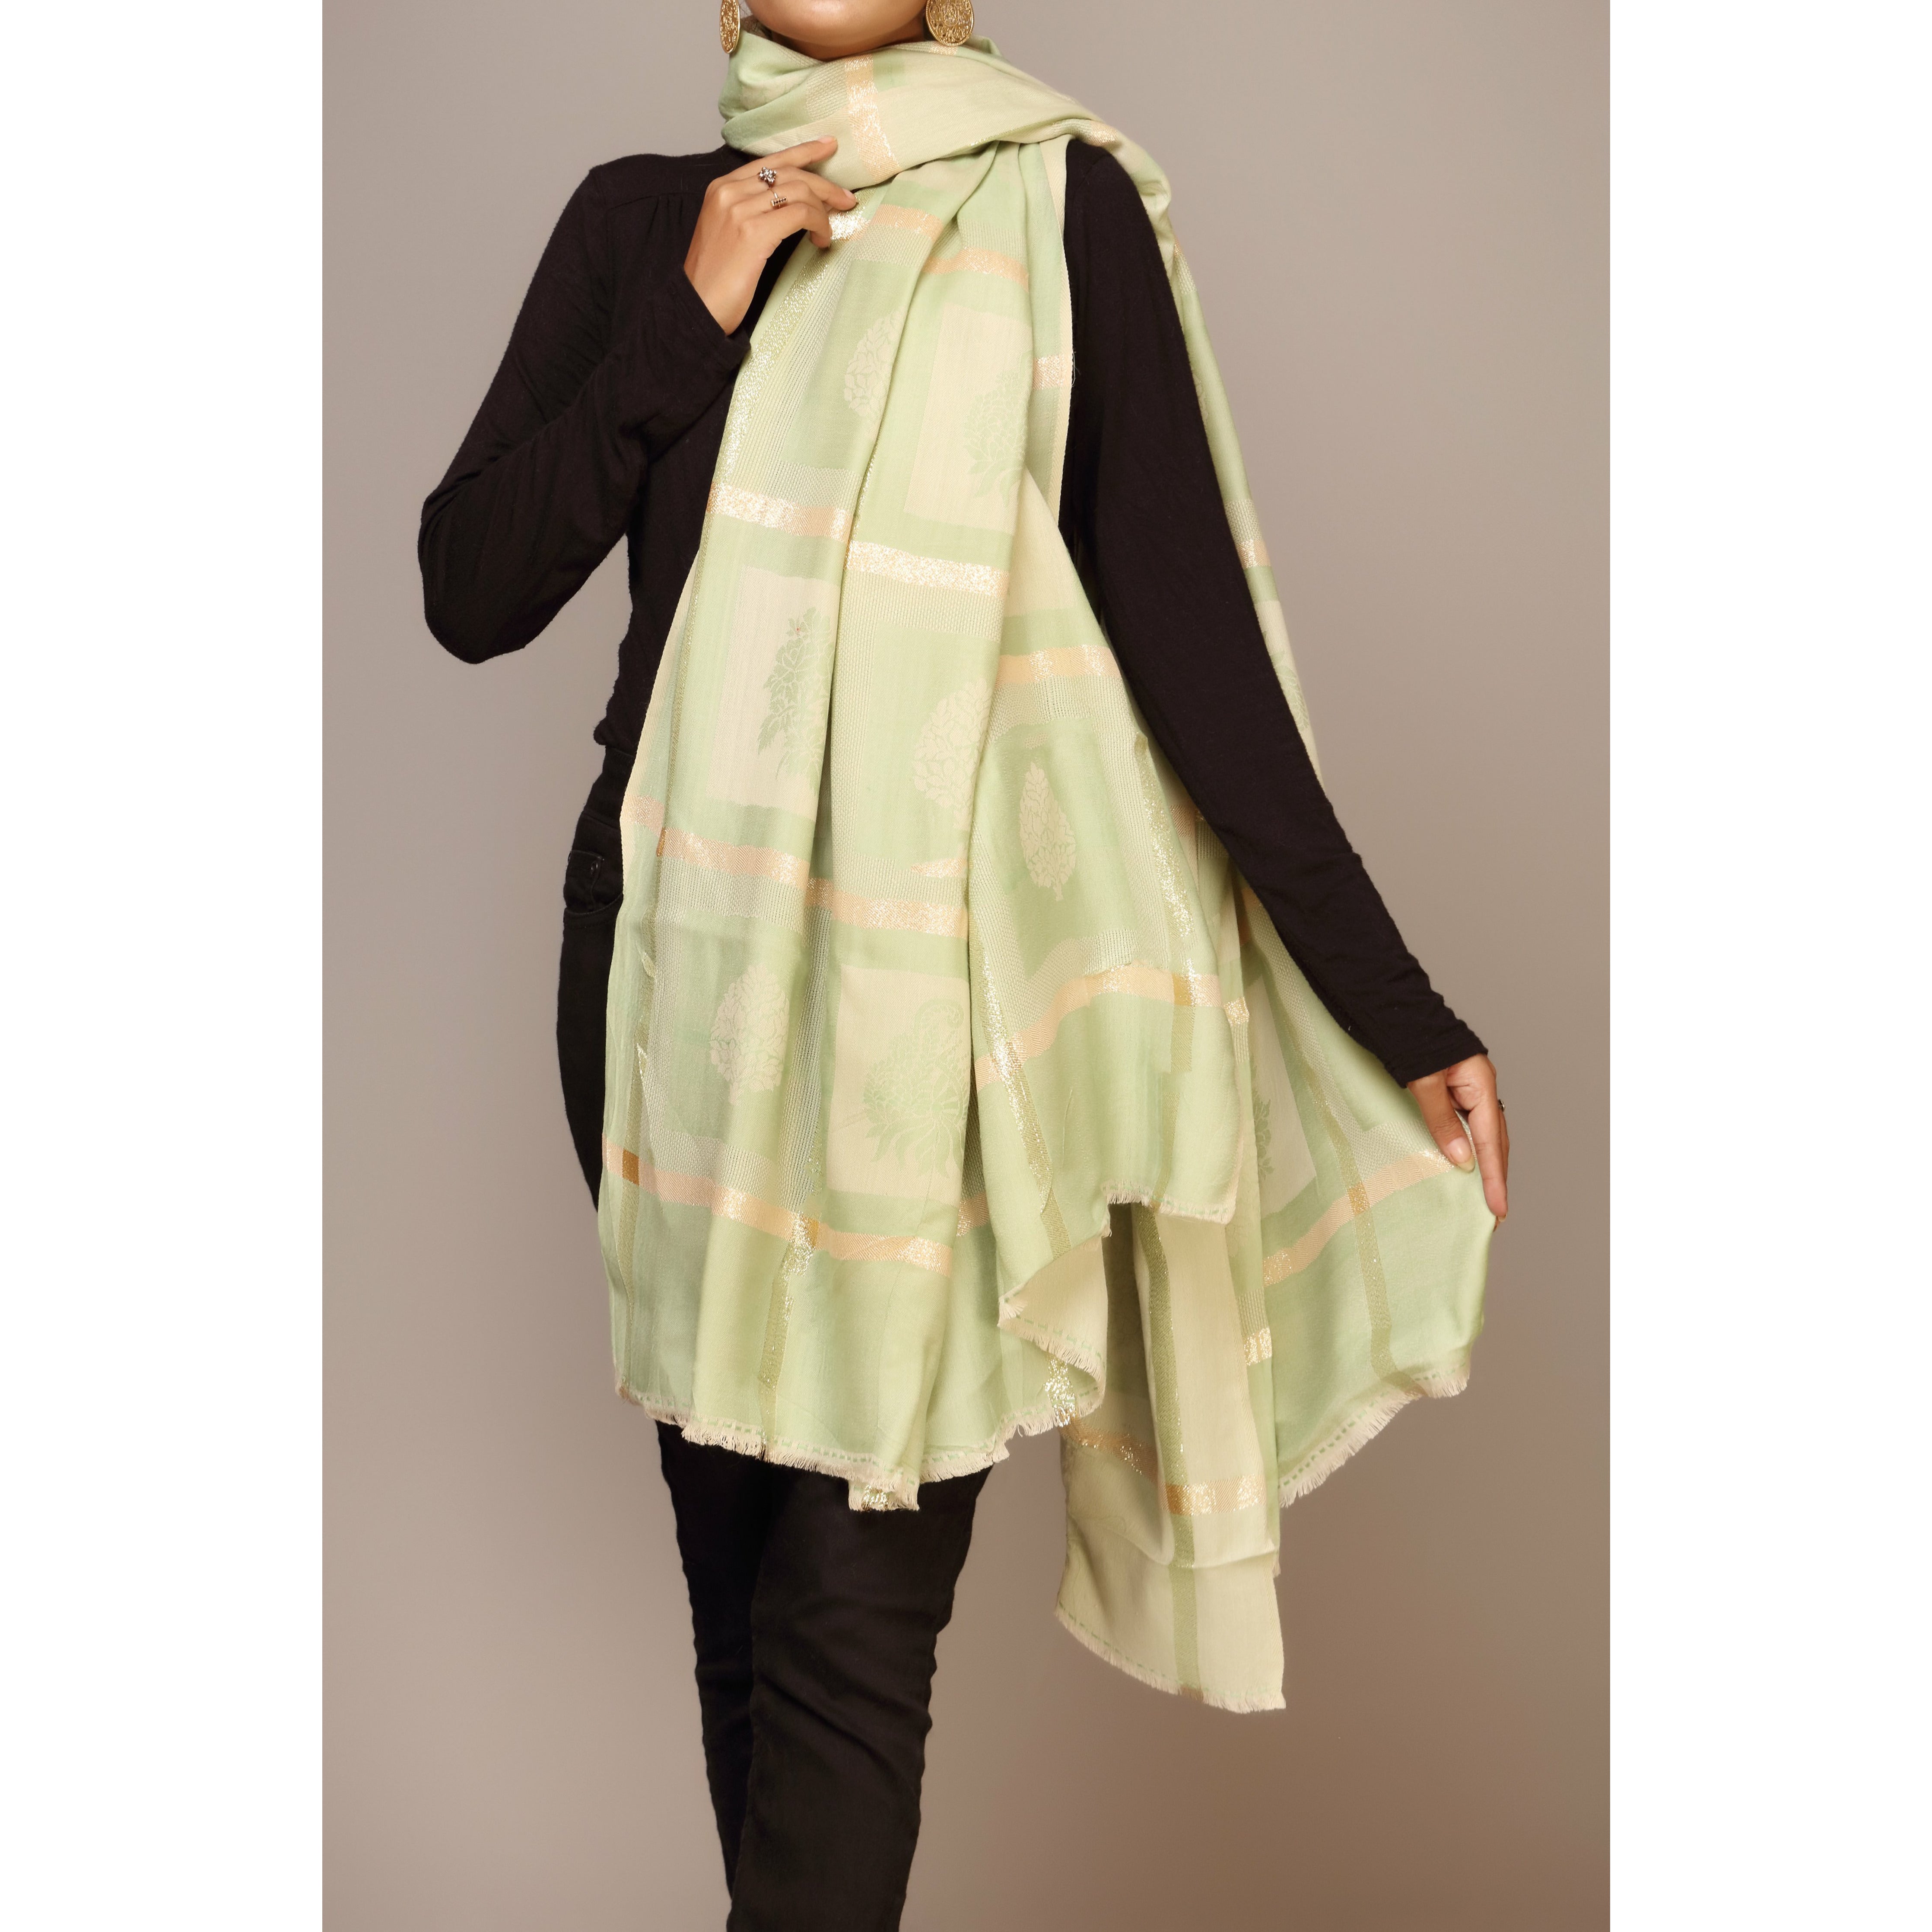 Green Color Shawl PW1710